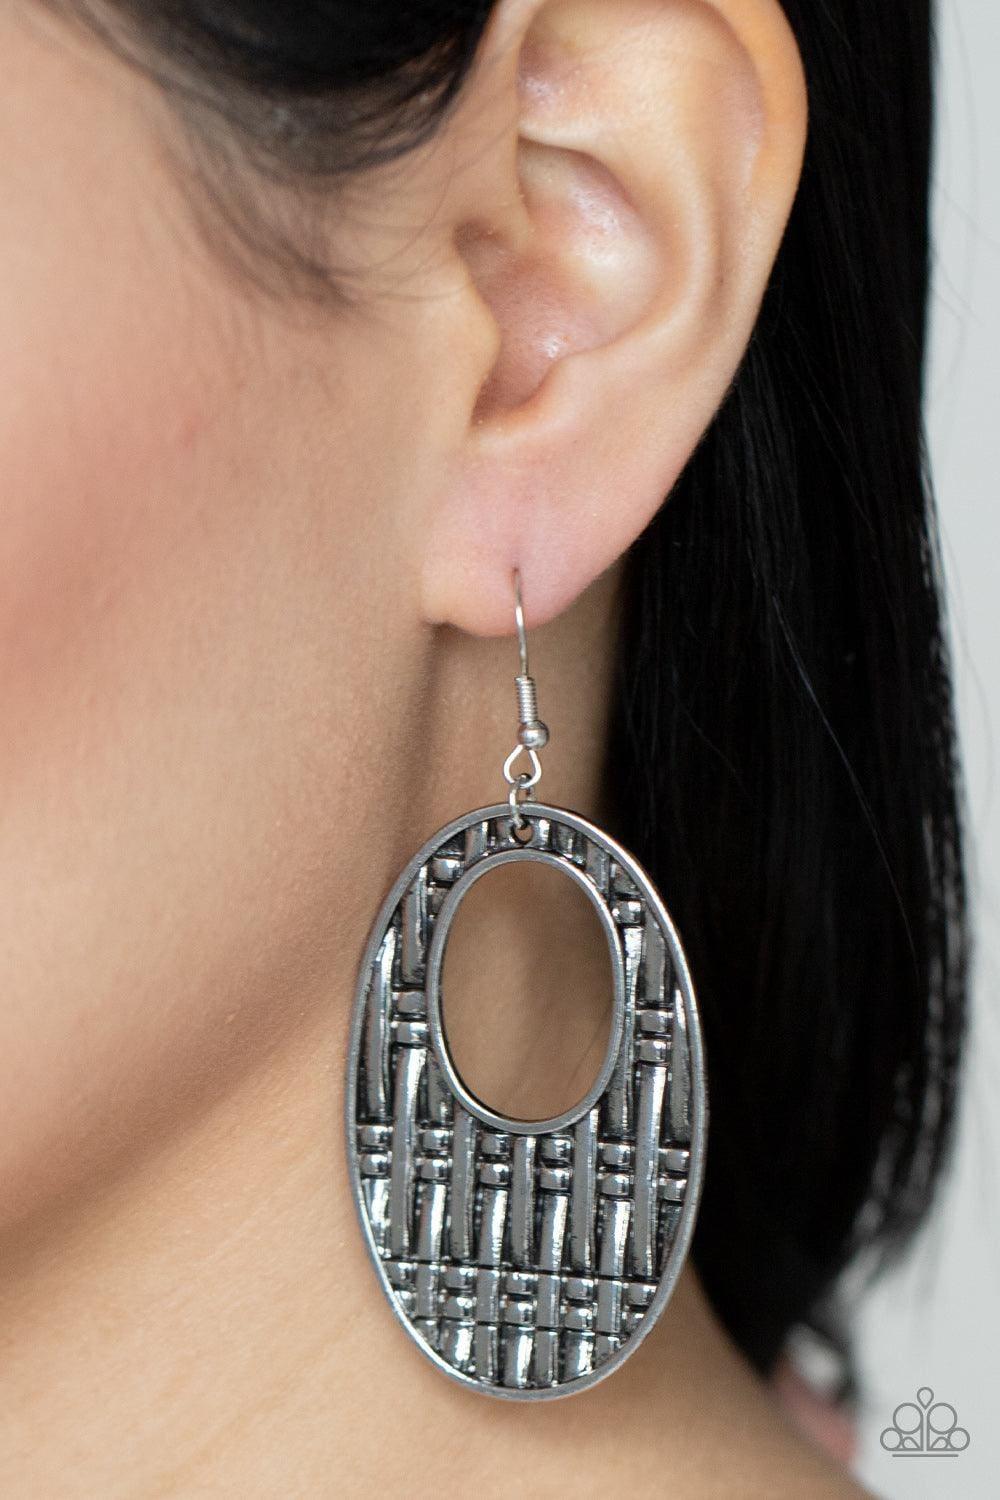 Paparazzi Accessories - Engraved Edge - Silver Earrings - Bling by JessieK